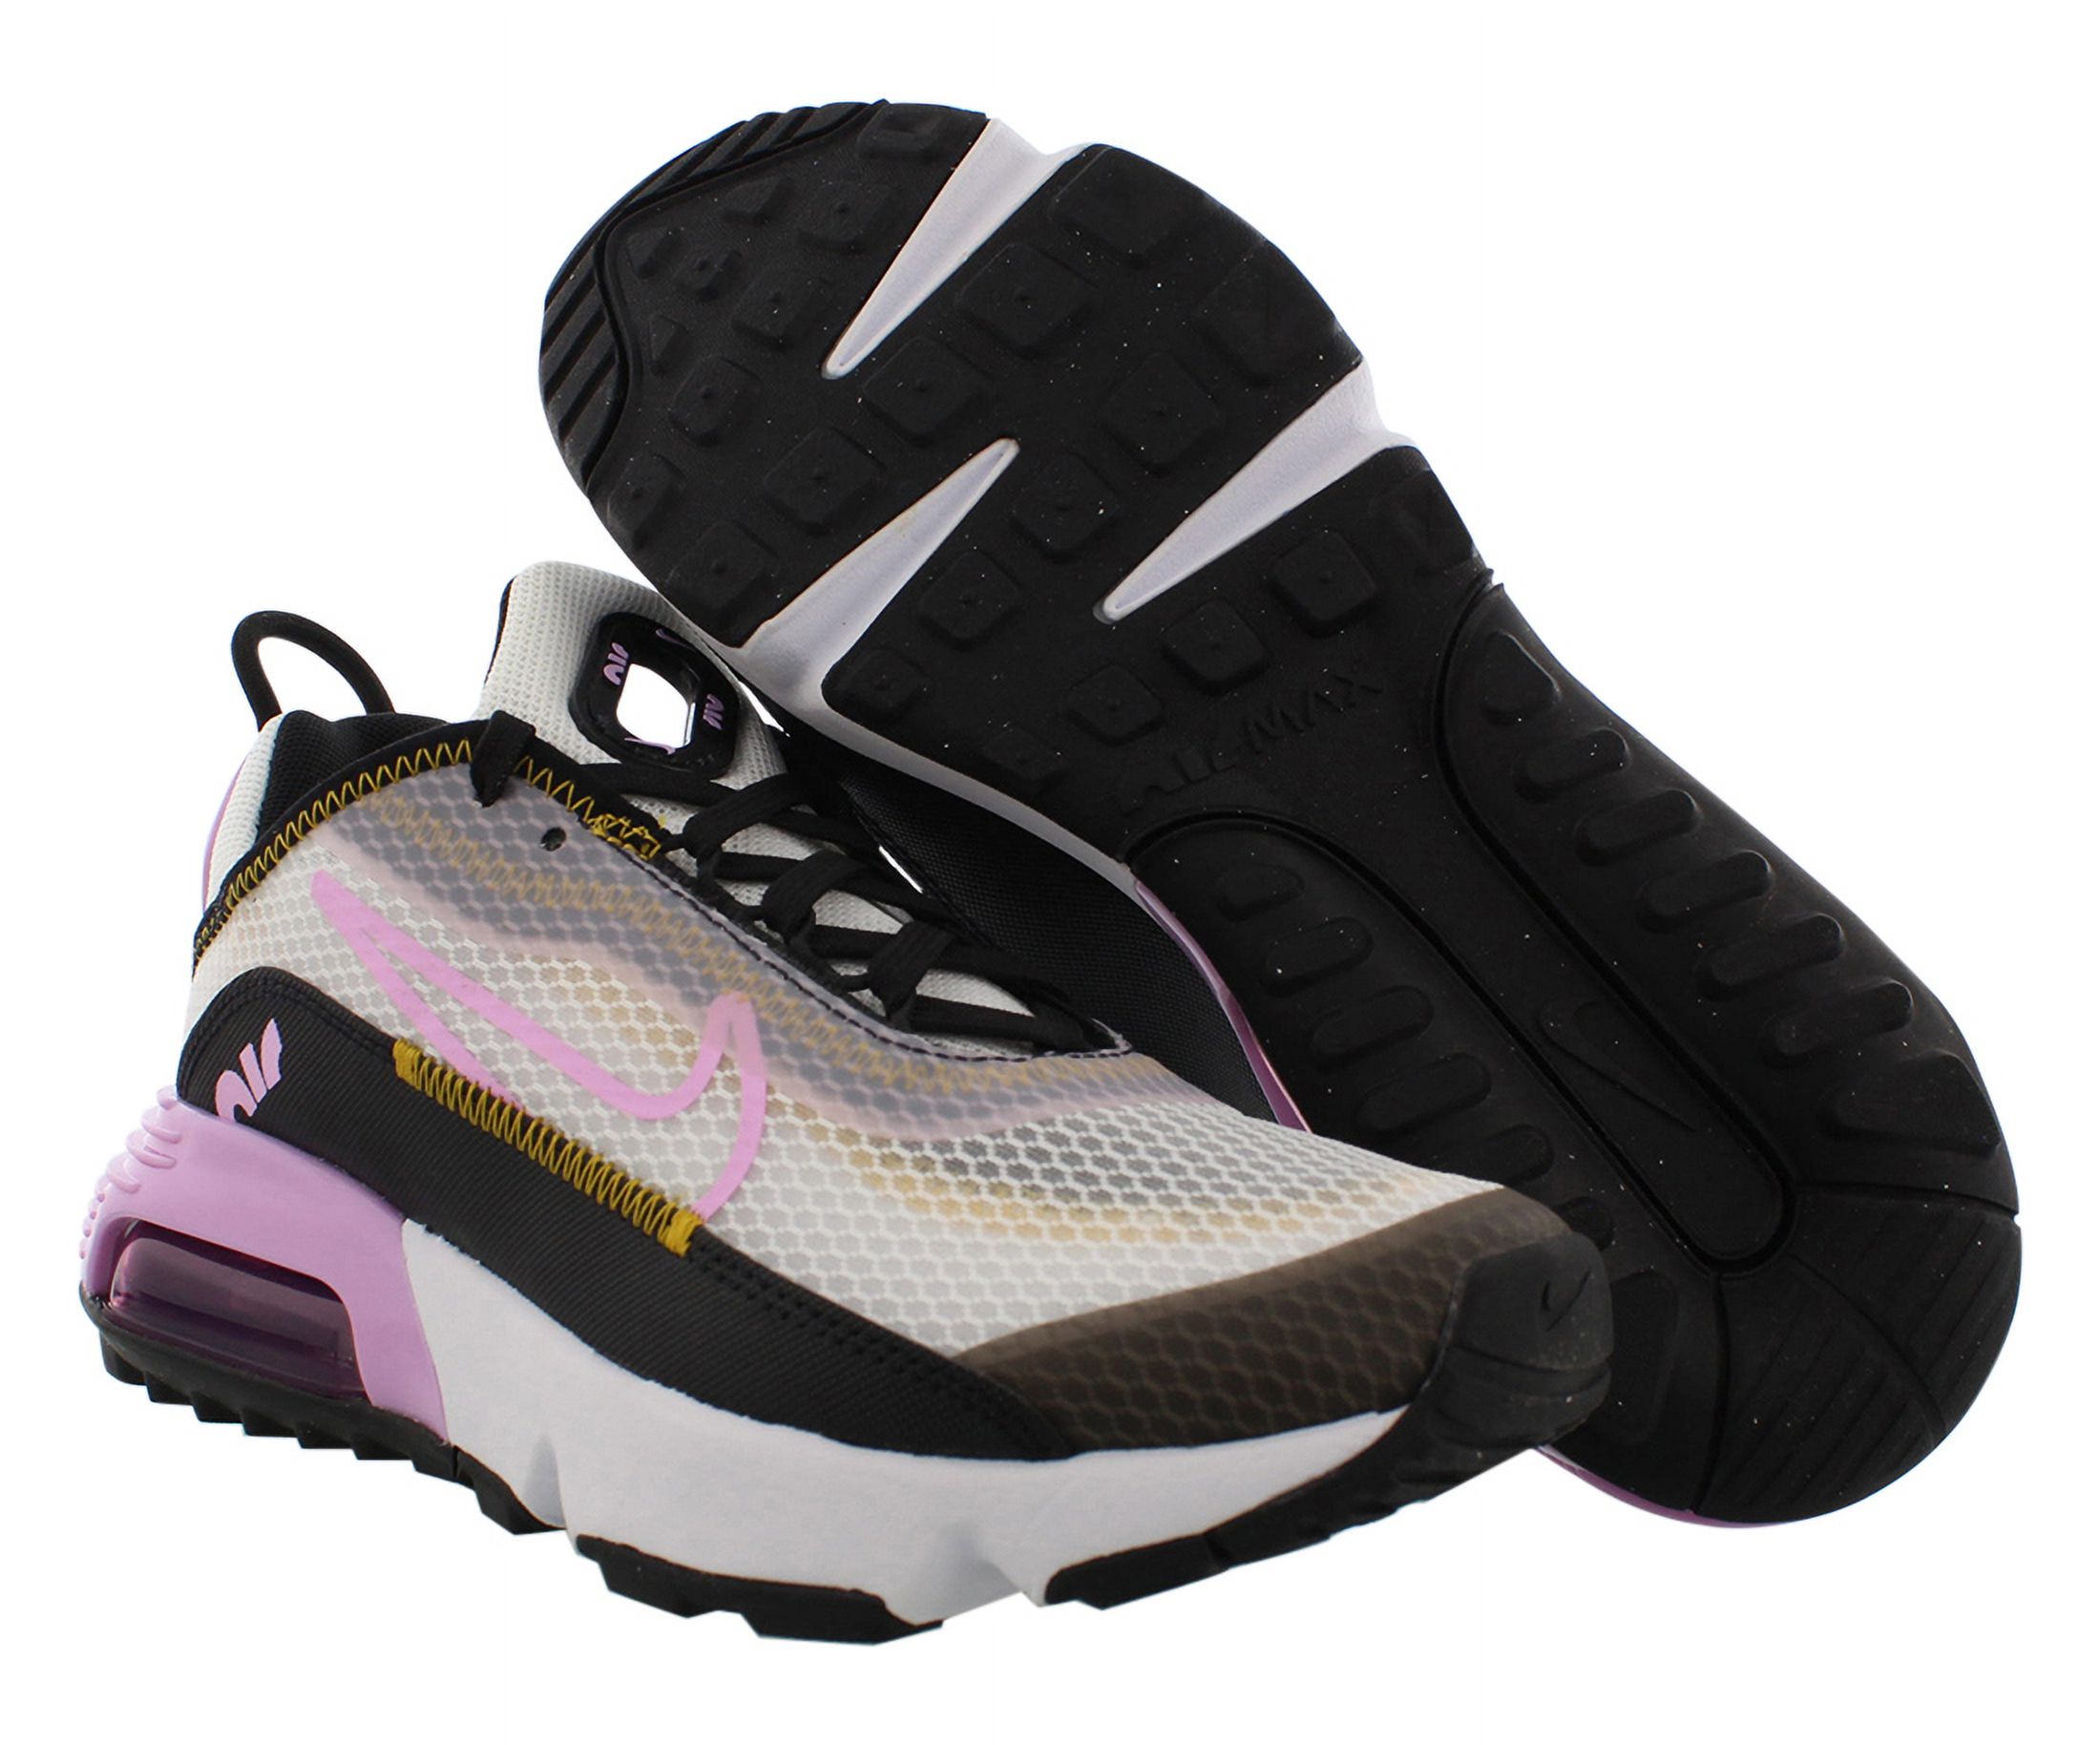 Nike Air Max 2090 Gs Girls Shoes Size 6.5, Color: White/Light Arctic Pink/Black - image 4 of 4